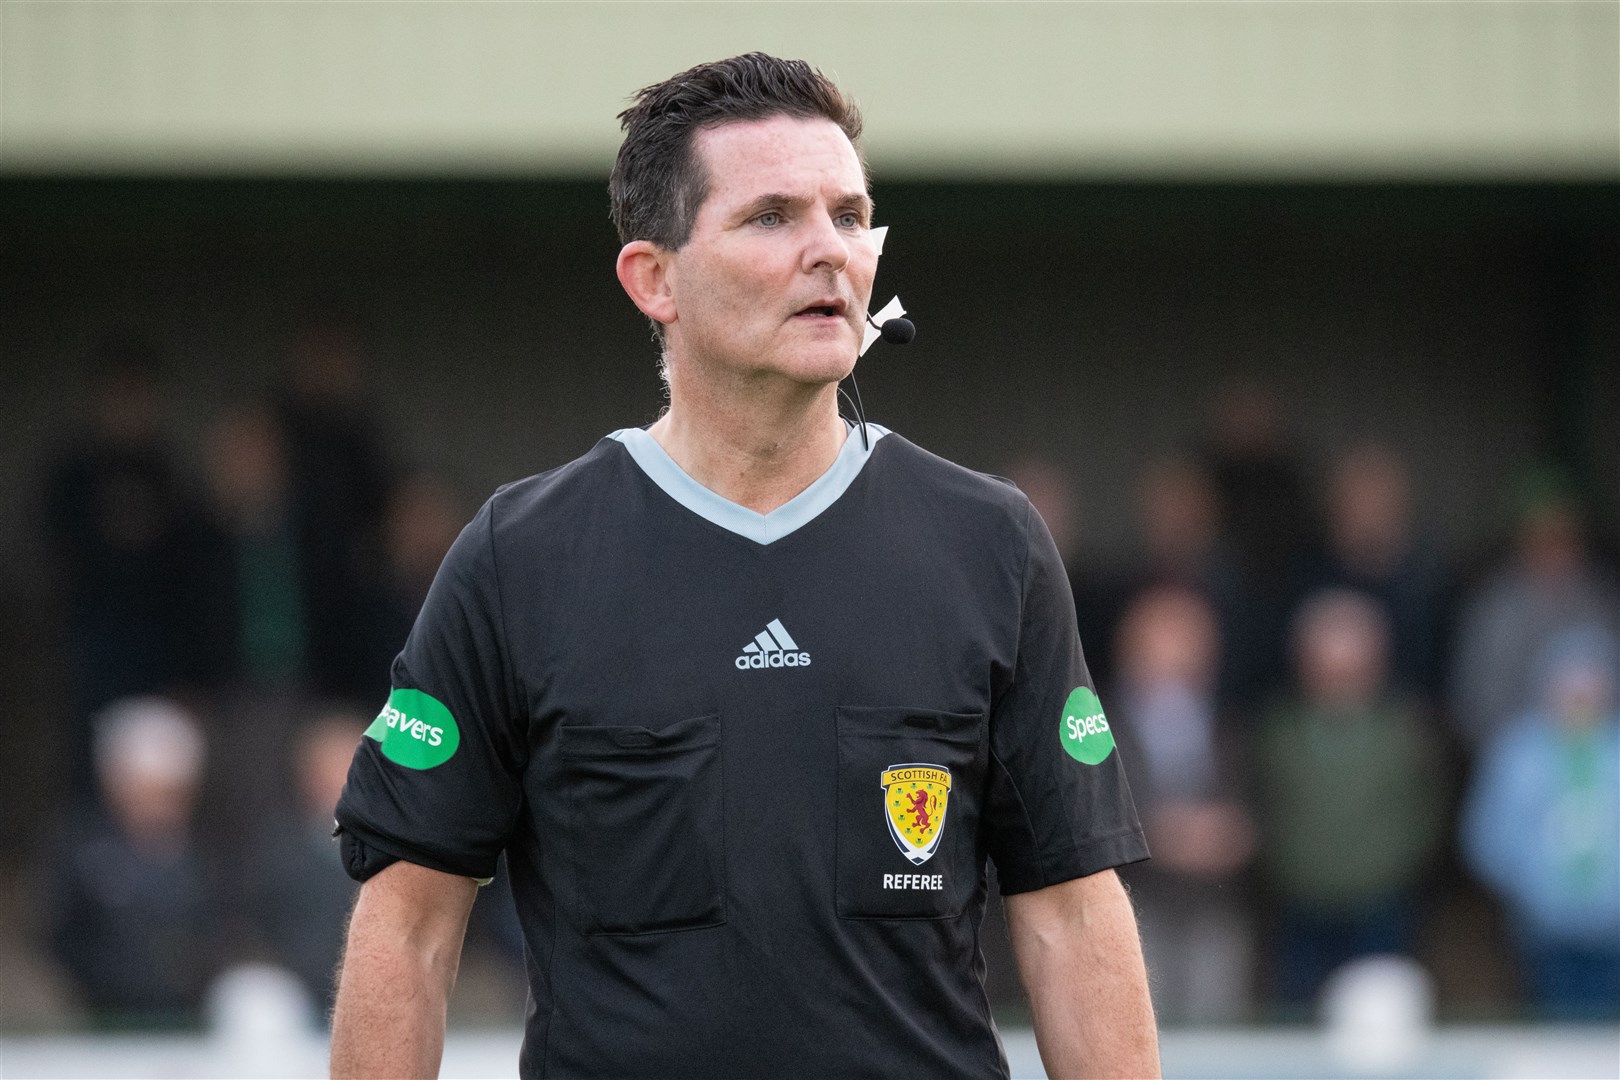 Referee Billy Baxter. ..Buckie Thistle FC (2) vs Forres Mechanics FC (0) - Highland Football League 22/23 - Victoria Park, Buckie 29/10/2022...Picture: Daniel Forsyth..